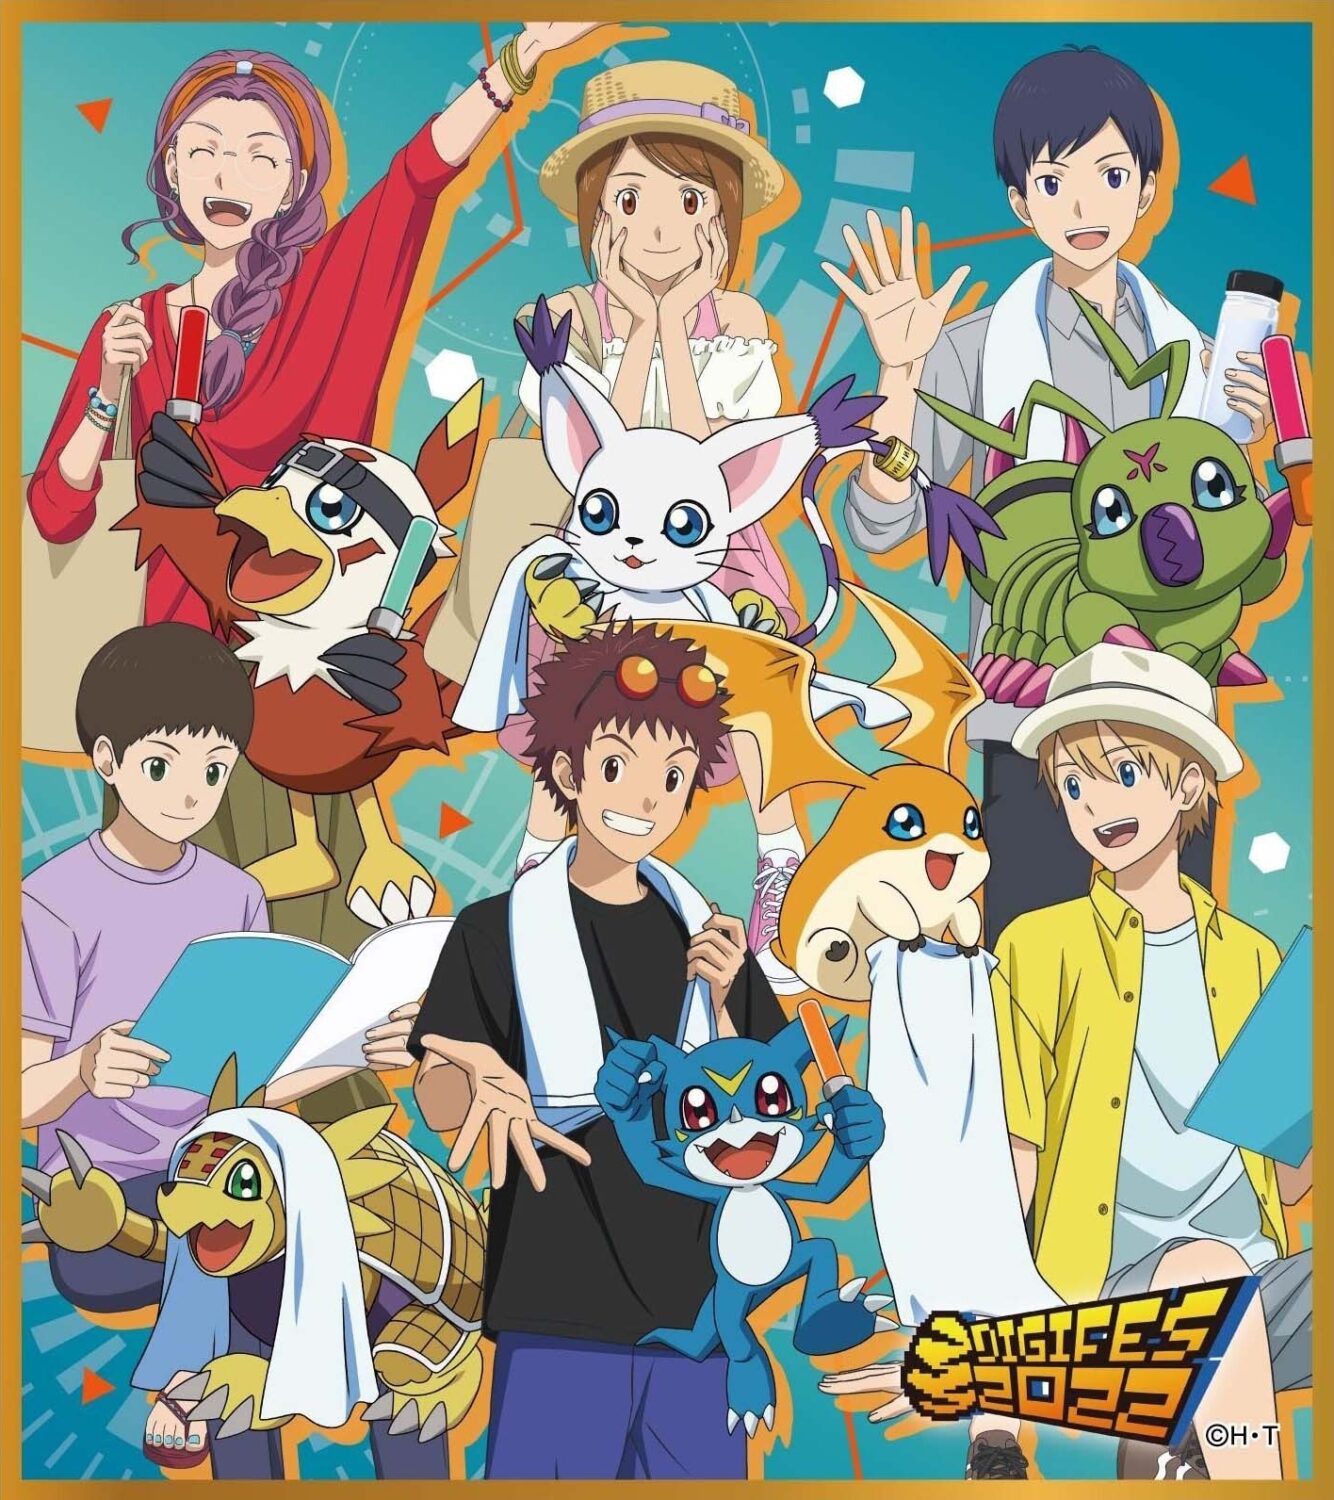 Digimon Adventure Tri - Chapters 1 & 2 Review: A Fantastical New Series -  Culturefly